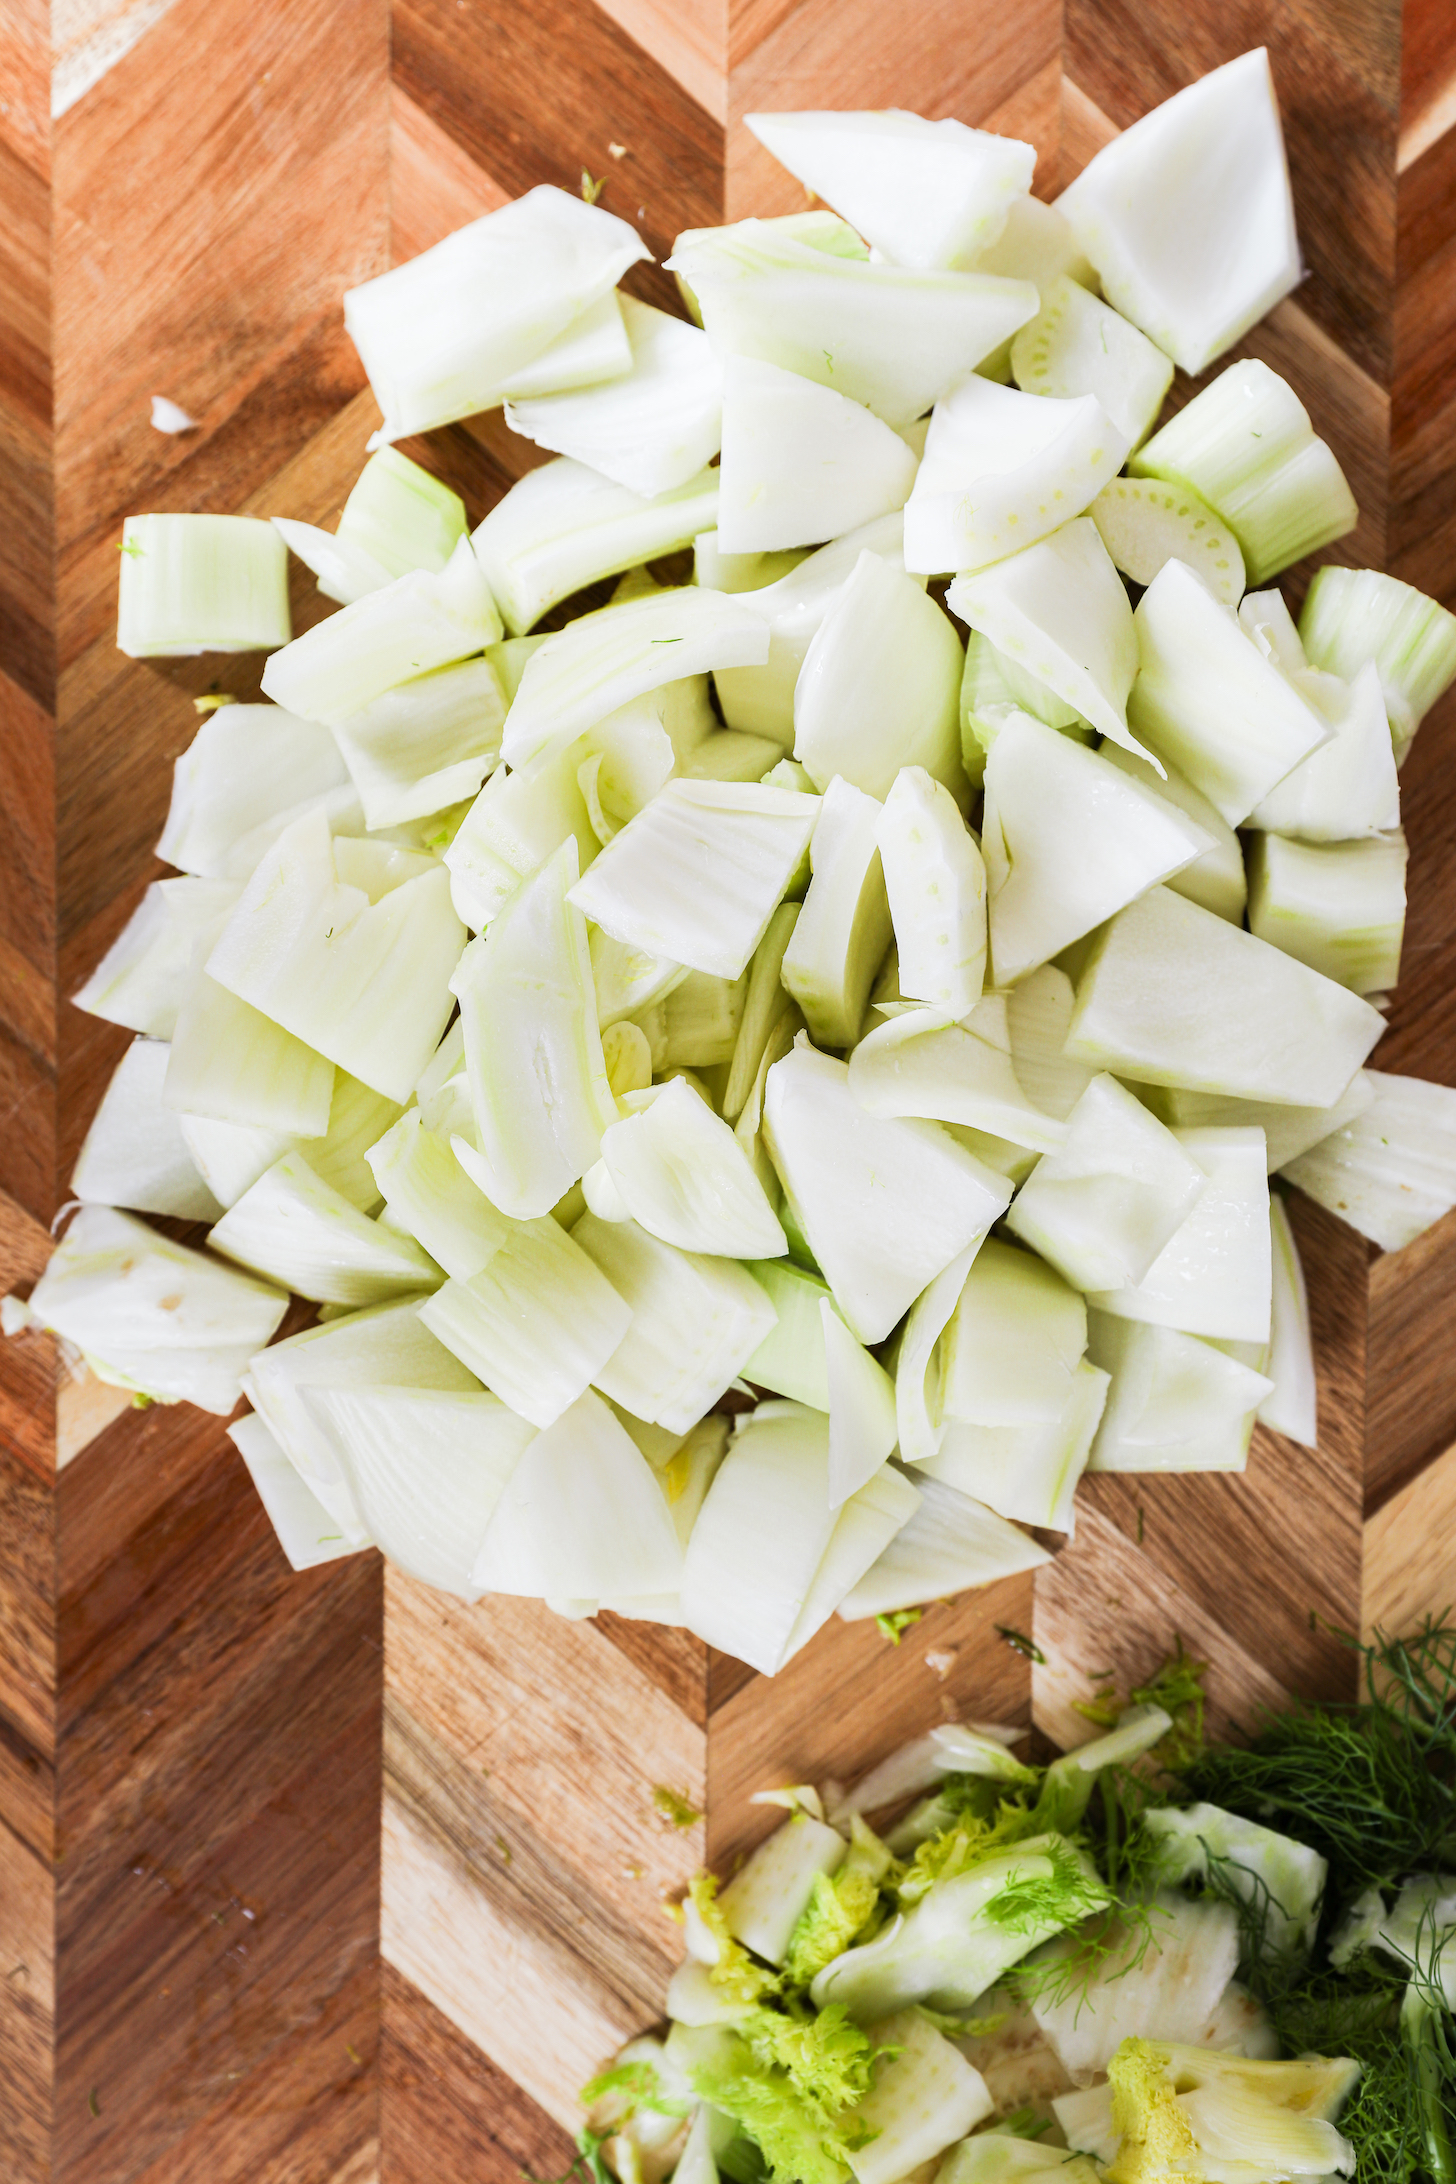 A mound of chopped fennel resting on a wooden chopping board, captured in detail for a visual experience.